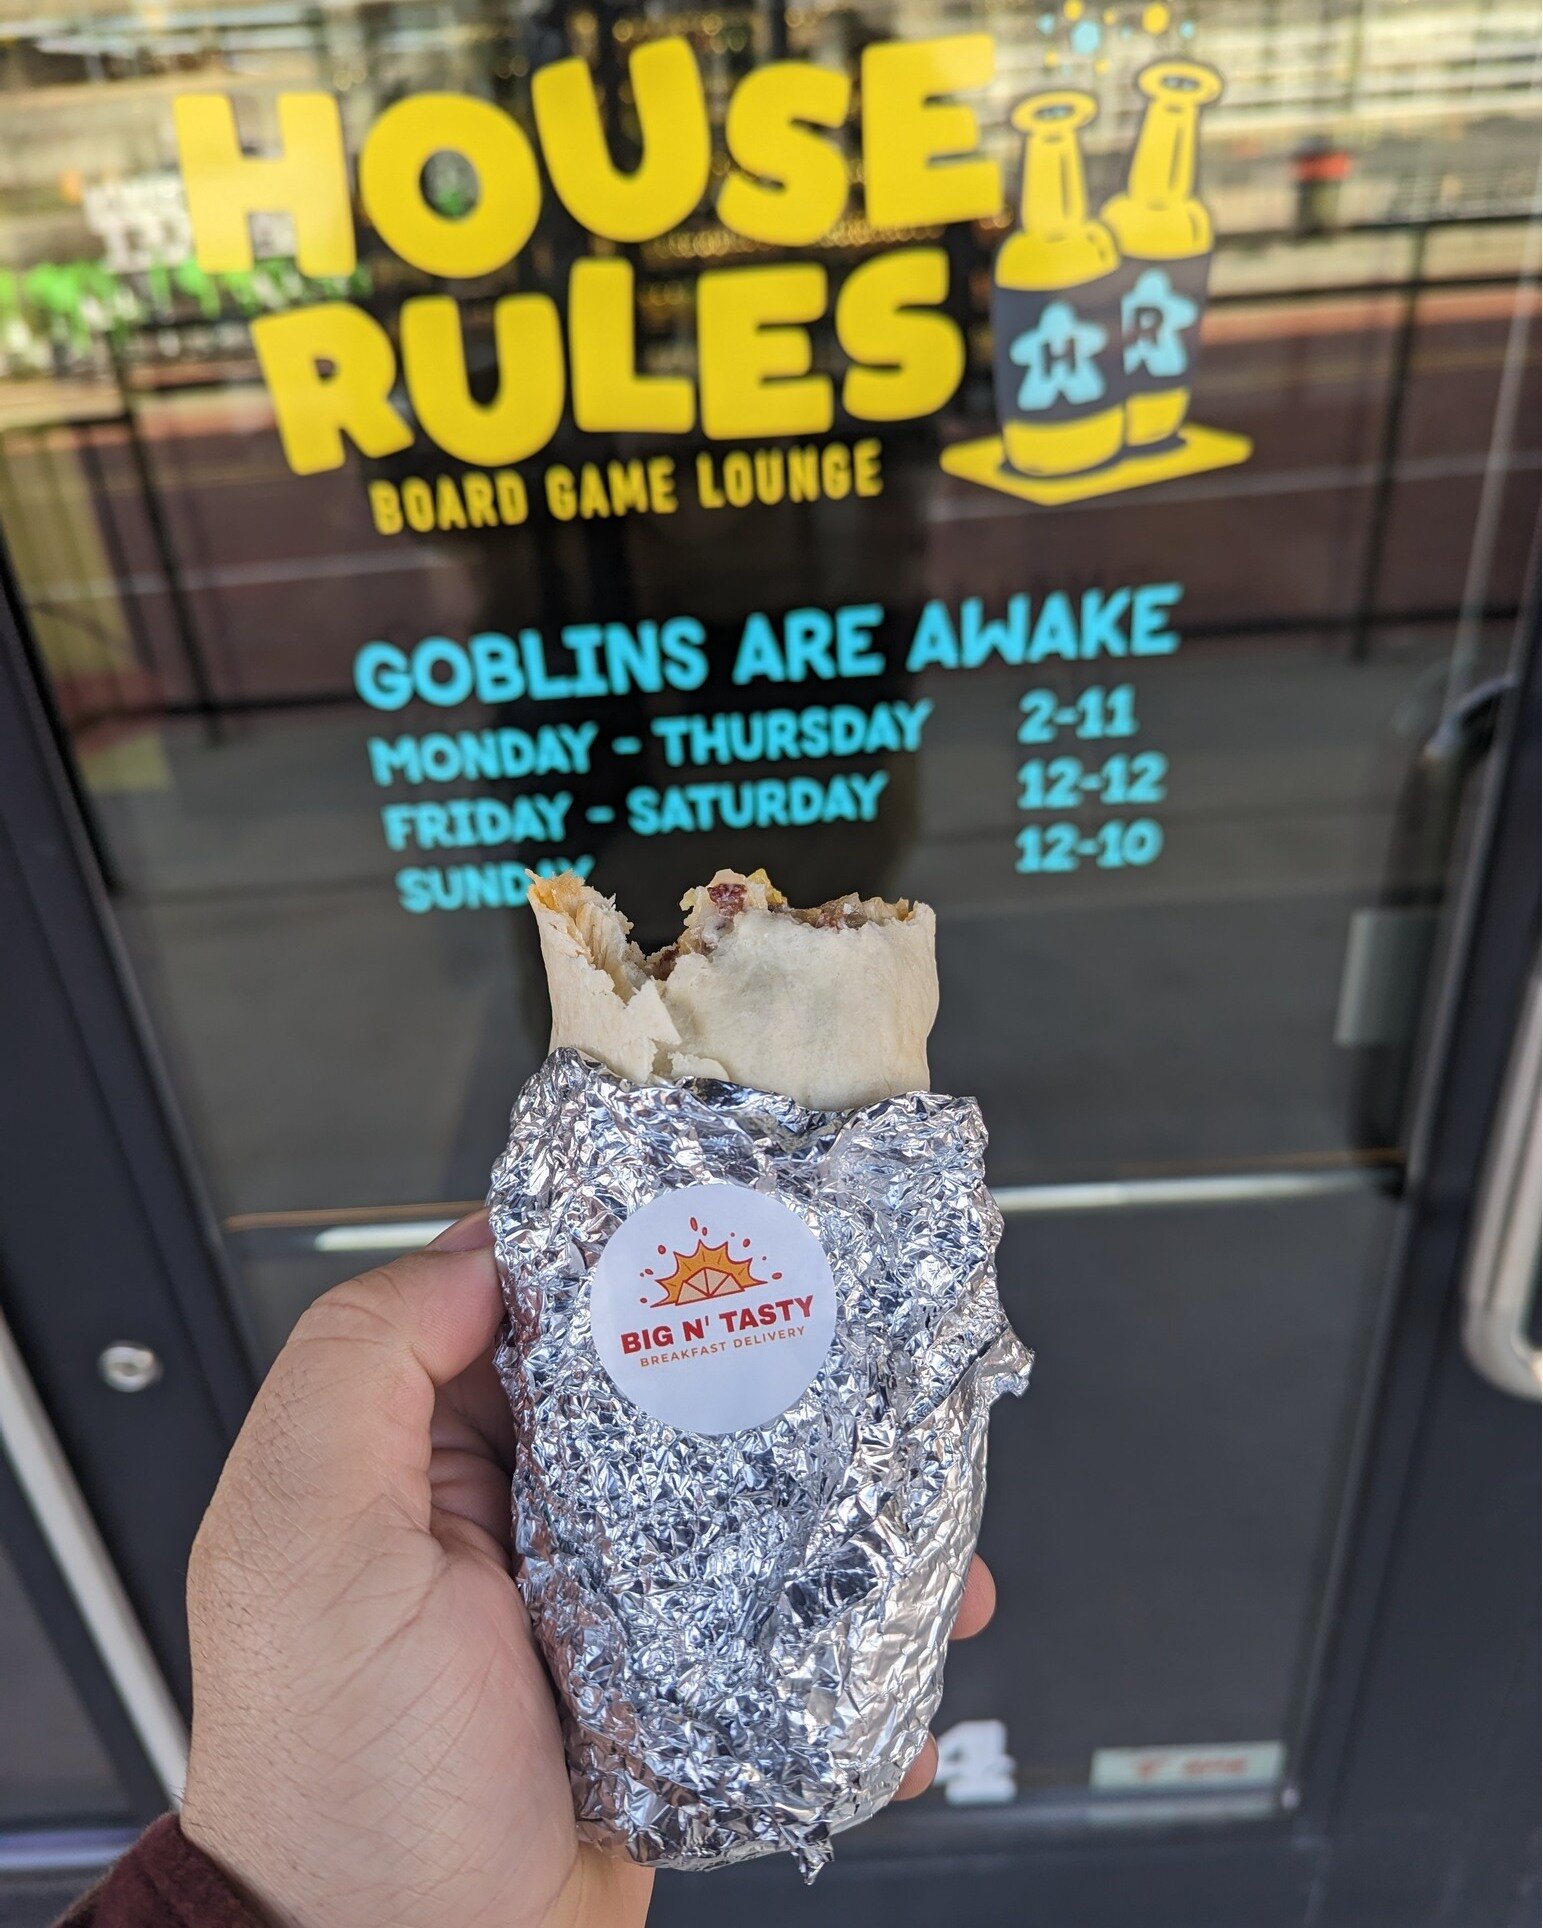 Beer, board games and breakfast! There's no better combo! Come play boardgames and enjoy one of our Big N tasty burritos at House of Rules next Saturday Noon to 3pm.